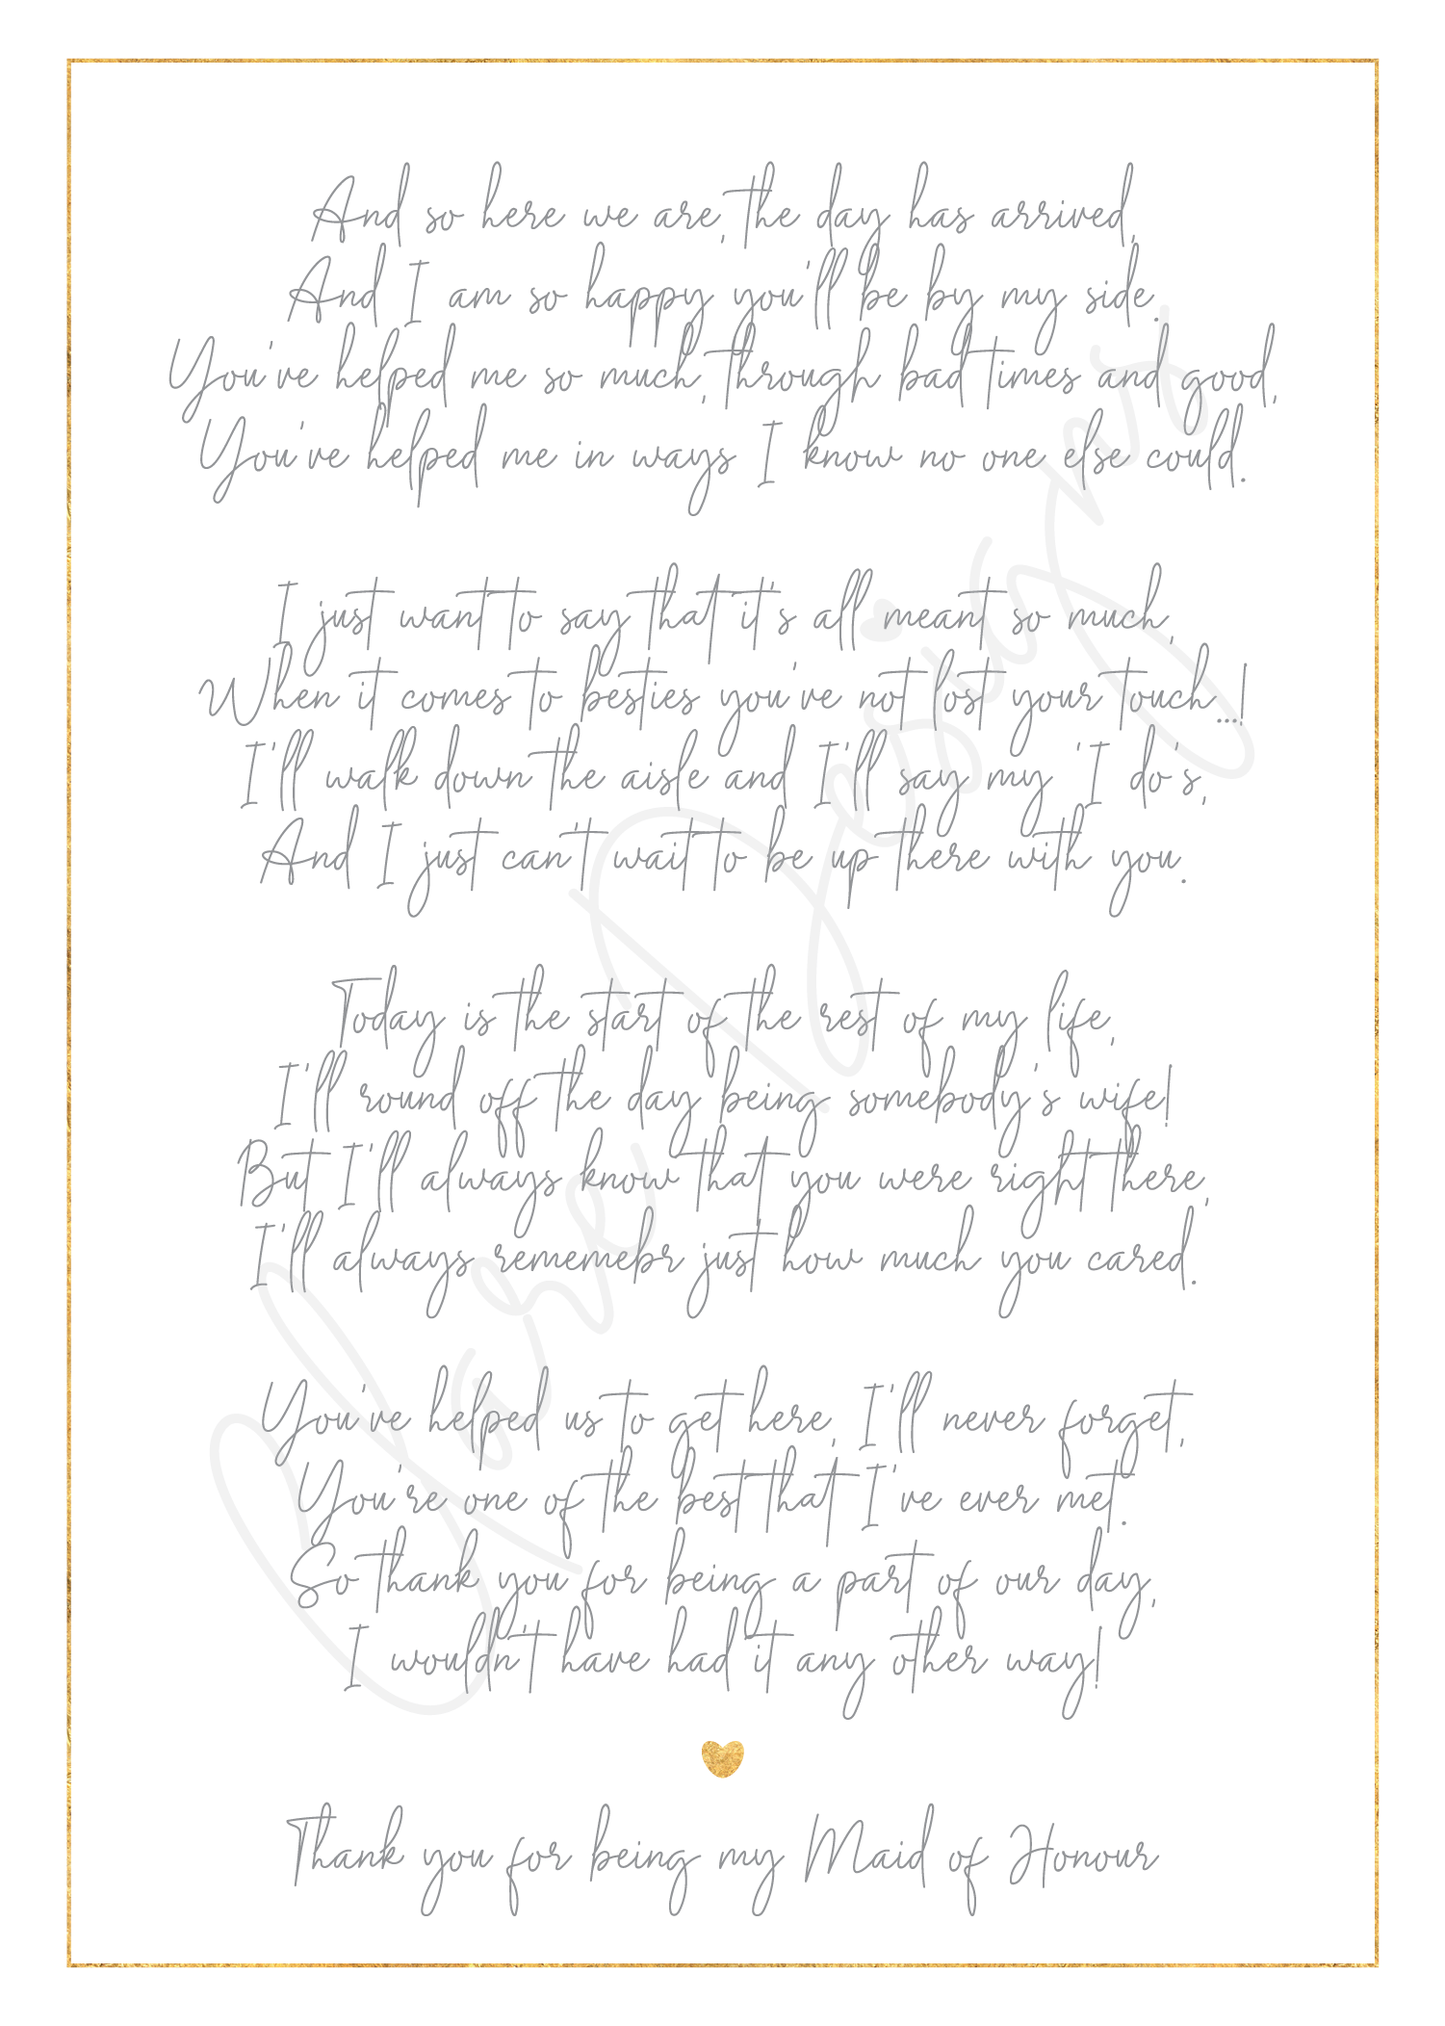 'Thank you for being my Bridesmaid/Maid of Honour' Poem Print